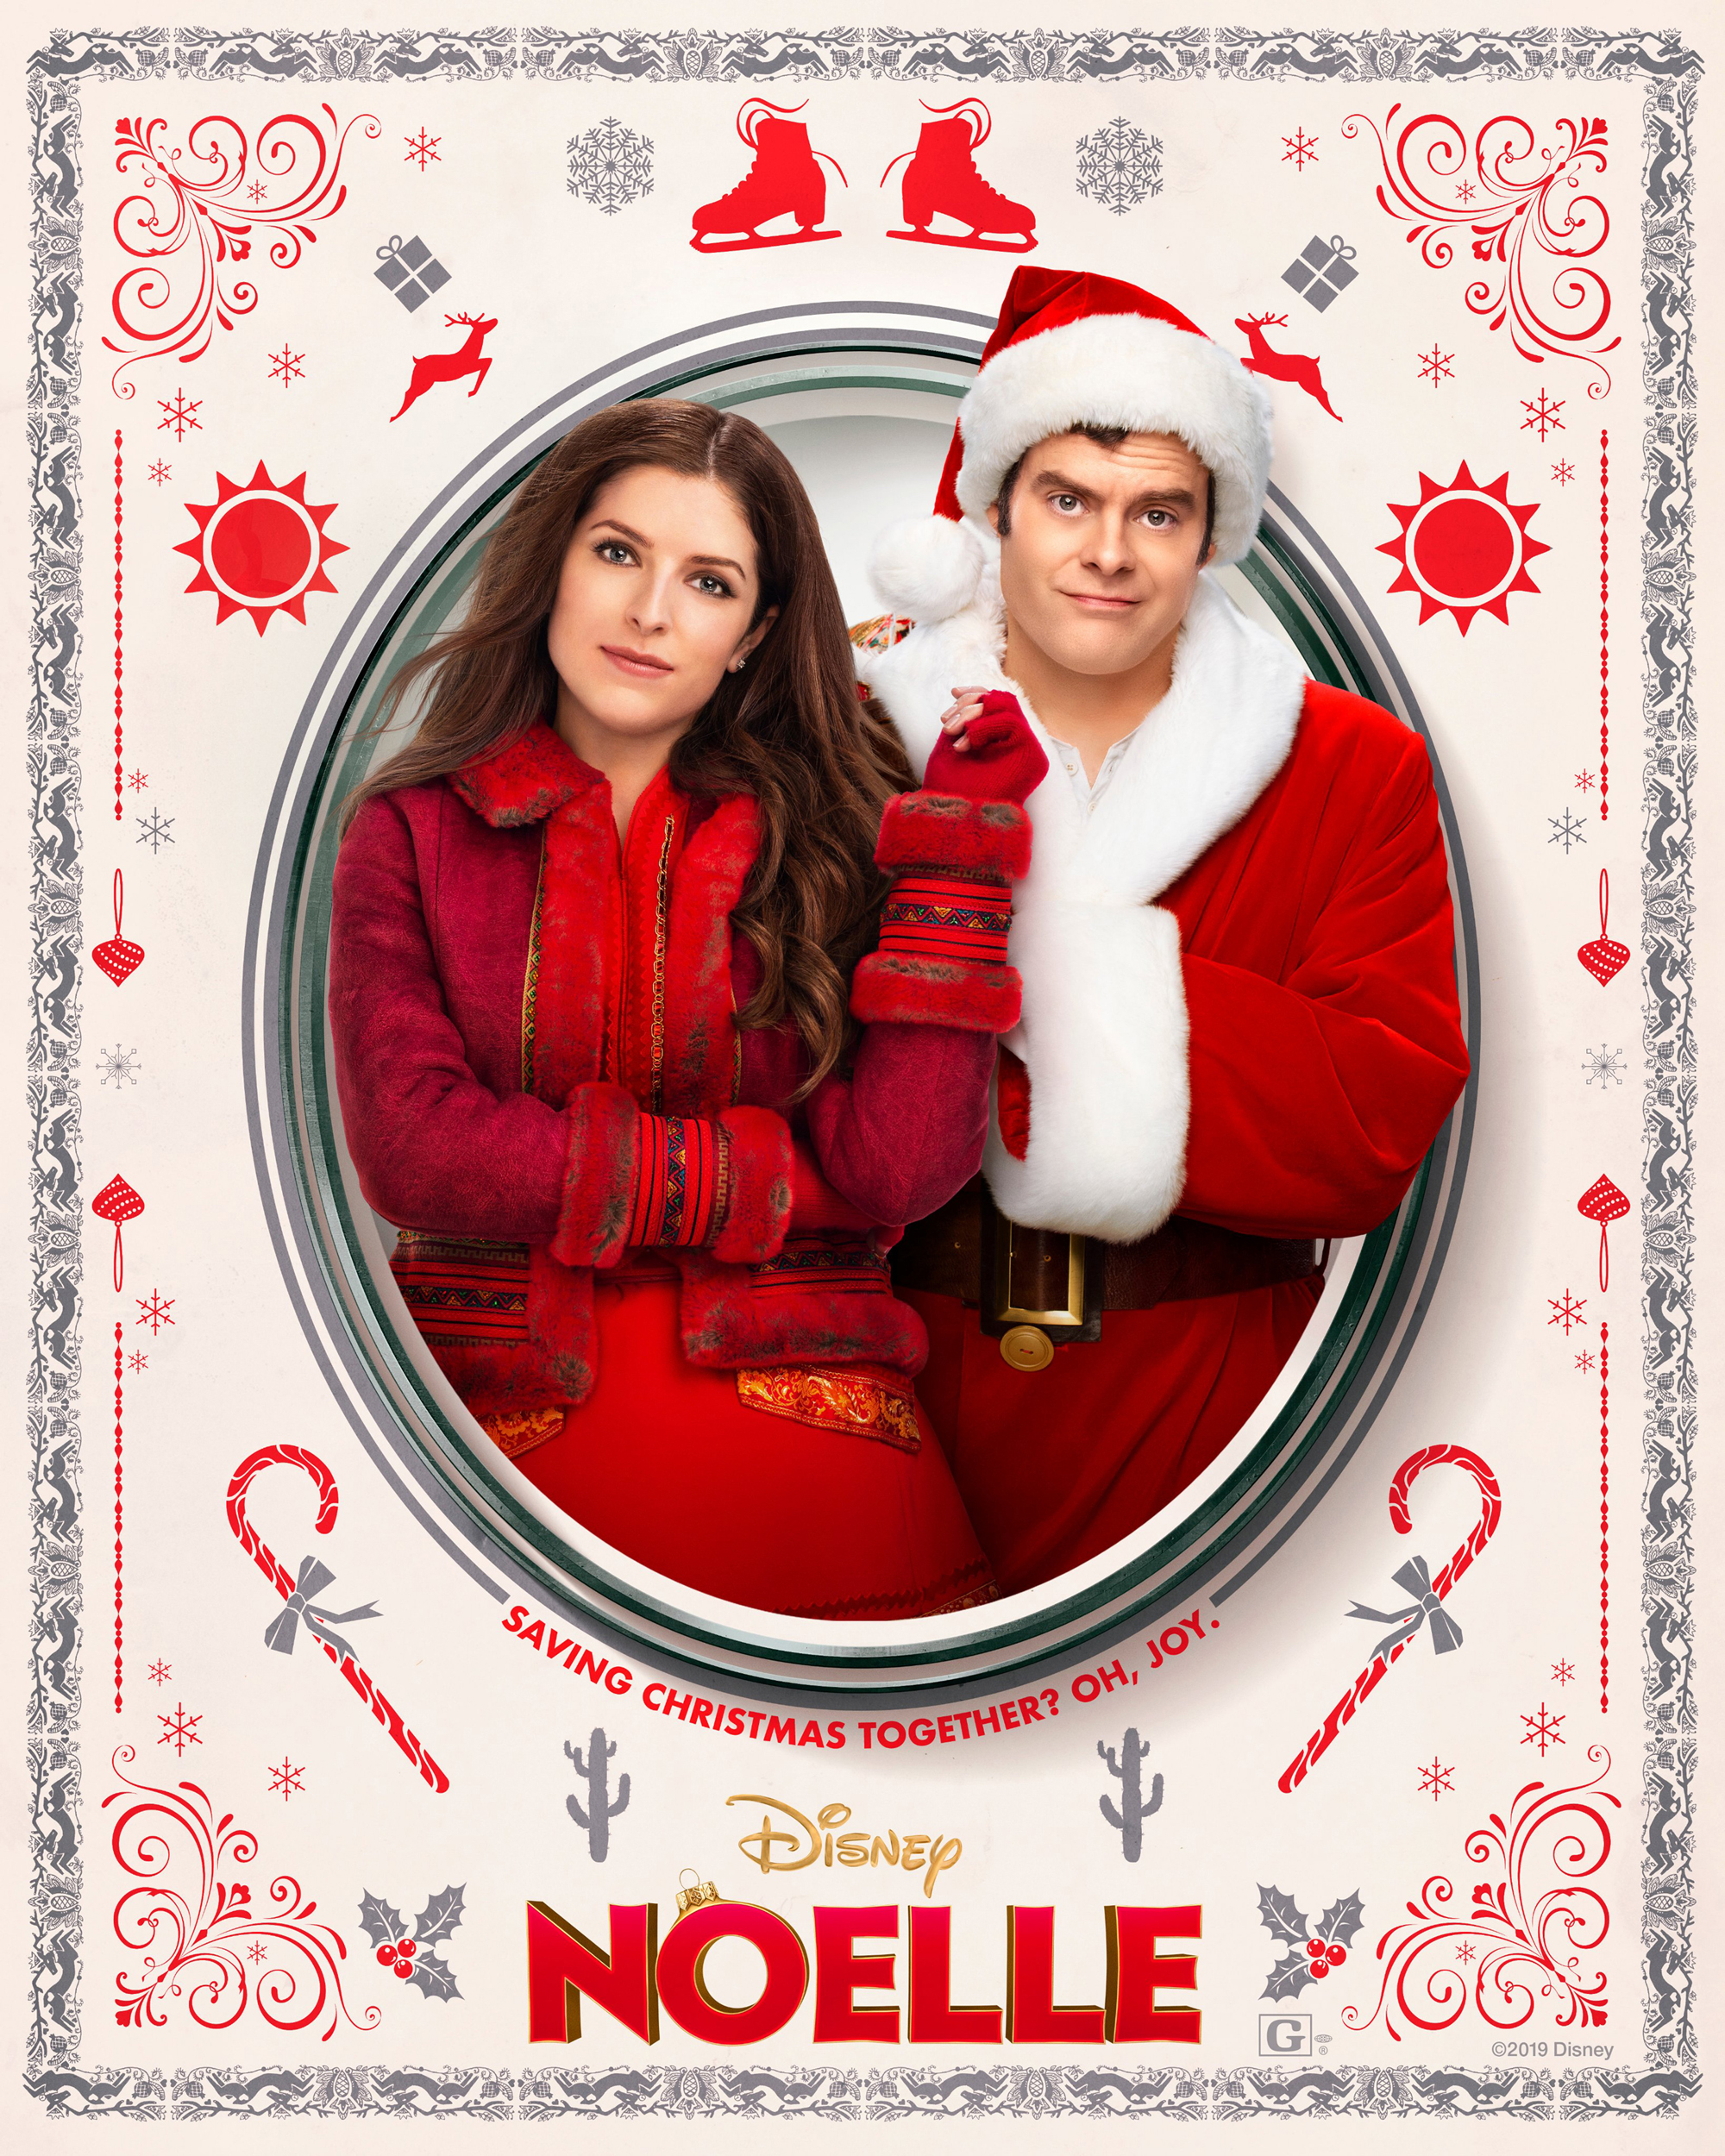 Noelle (2019) Character Poster - Anna Kendrick as Noelle Kringle and Bill Hader as Nick Kringle